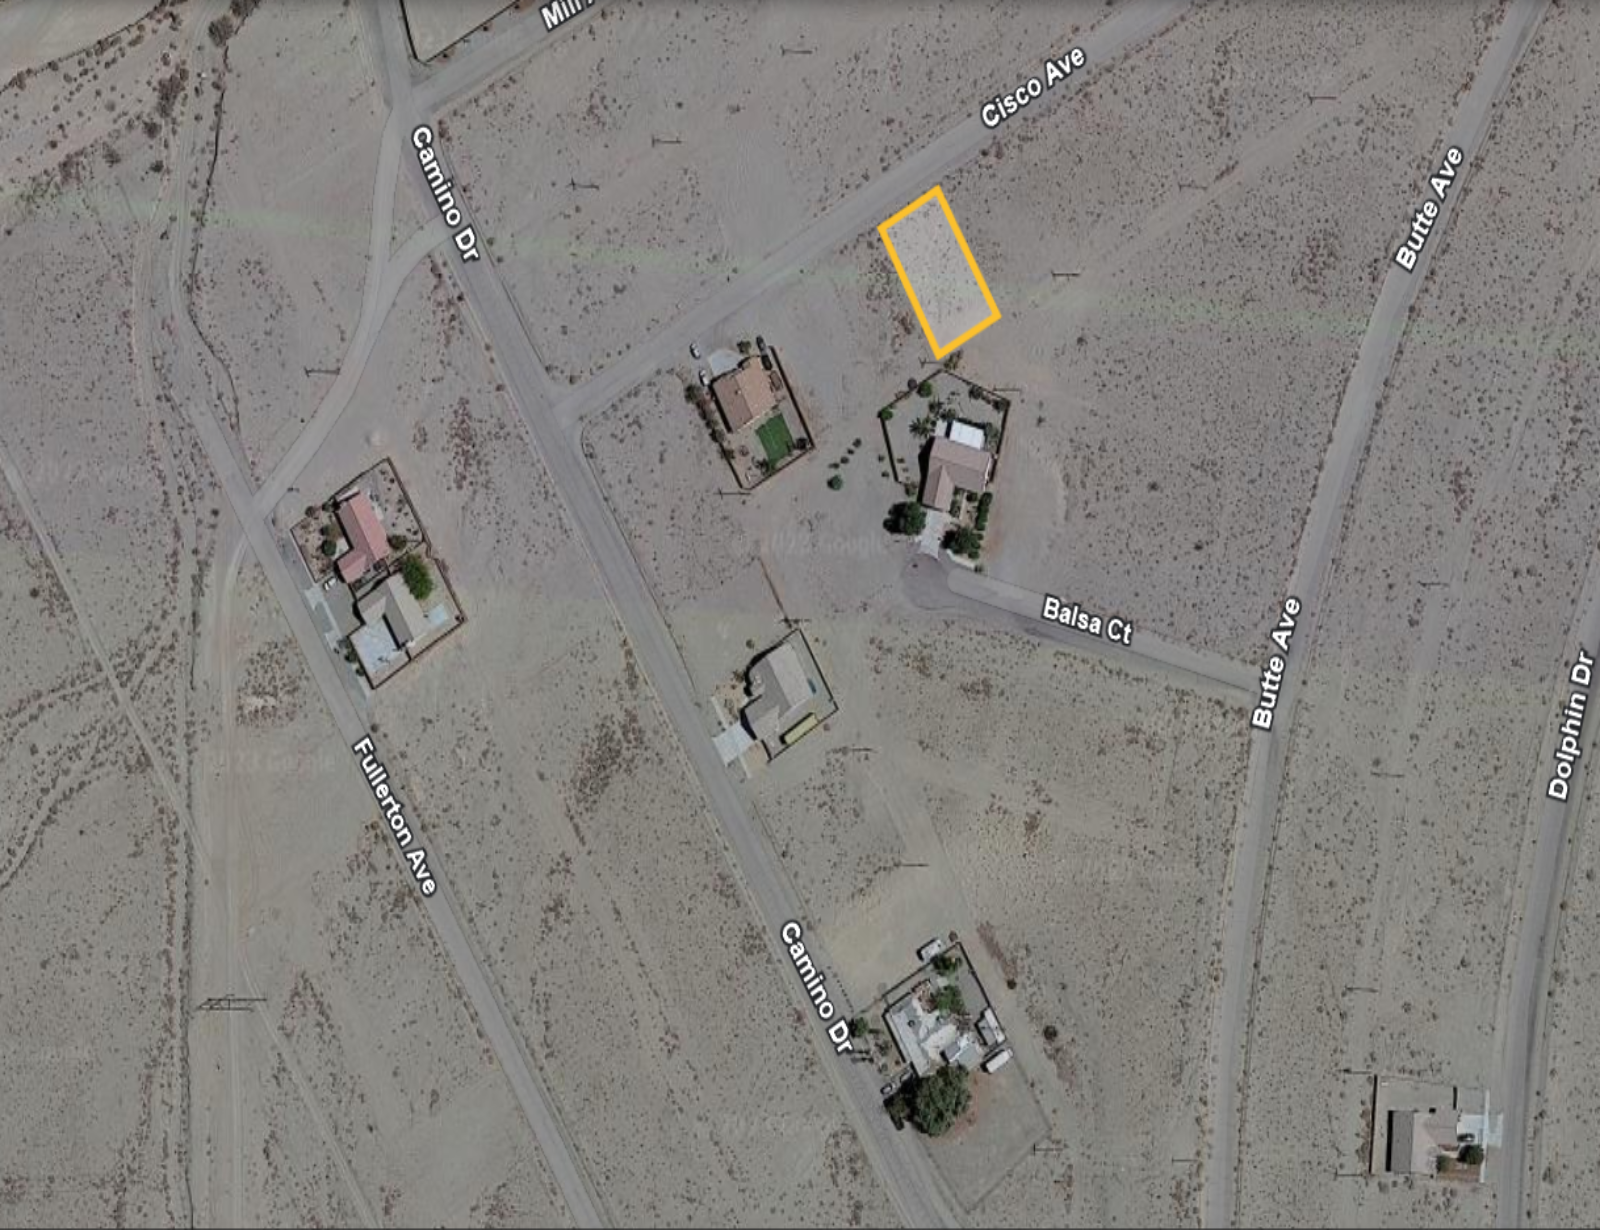 BEAUTIFUL RESIDENTIAL LOT WITH  DELIGHTFUL SCENERY BEHIND A NEWER MODEL HOME!! LOW MONTHLY PAYMENTS OF $175.00 1377 Cisco Ave., Salton City, CA 92275 APN: 009-093-009-000 - Get Land Today